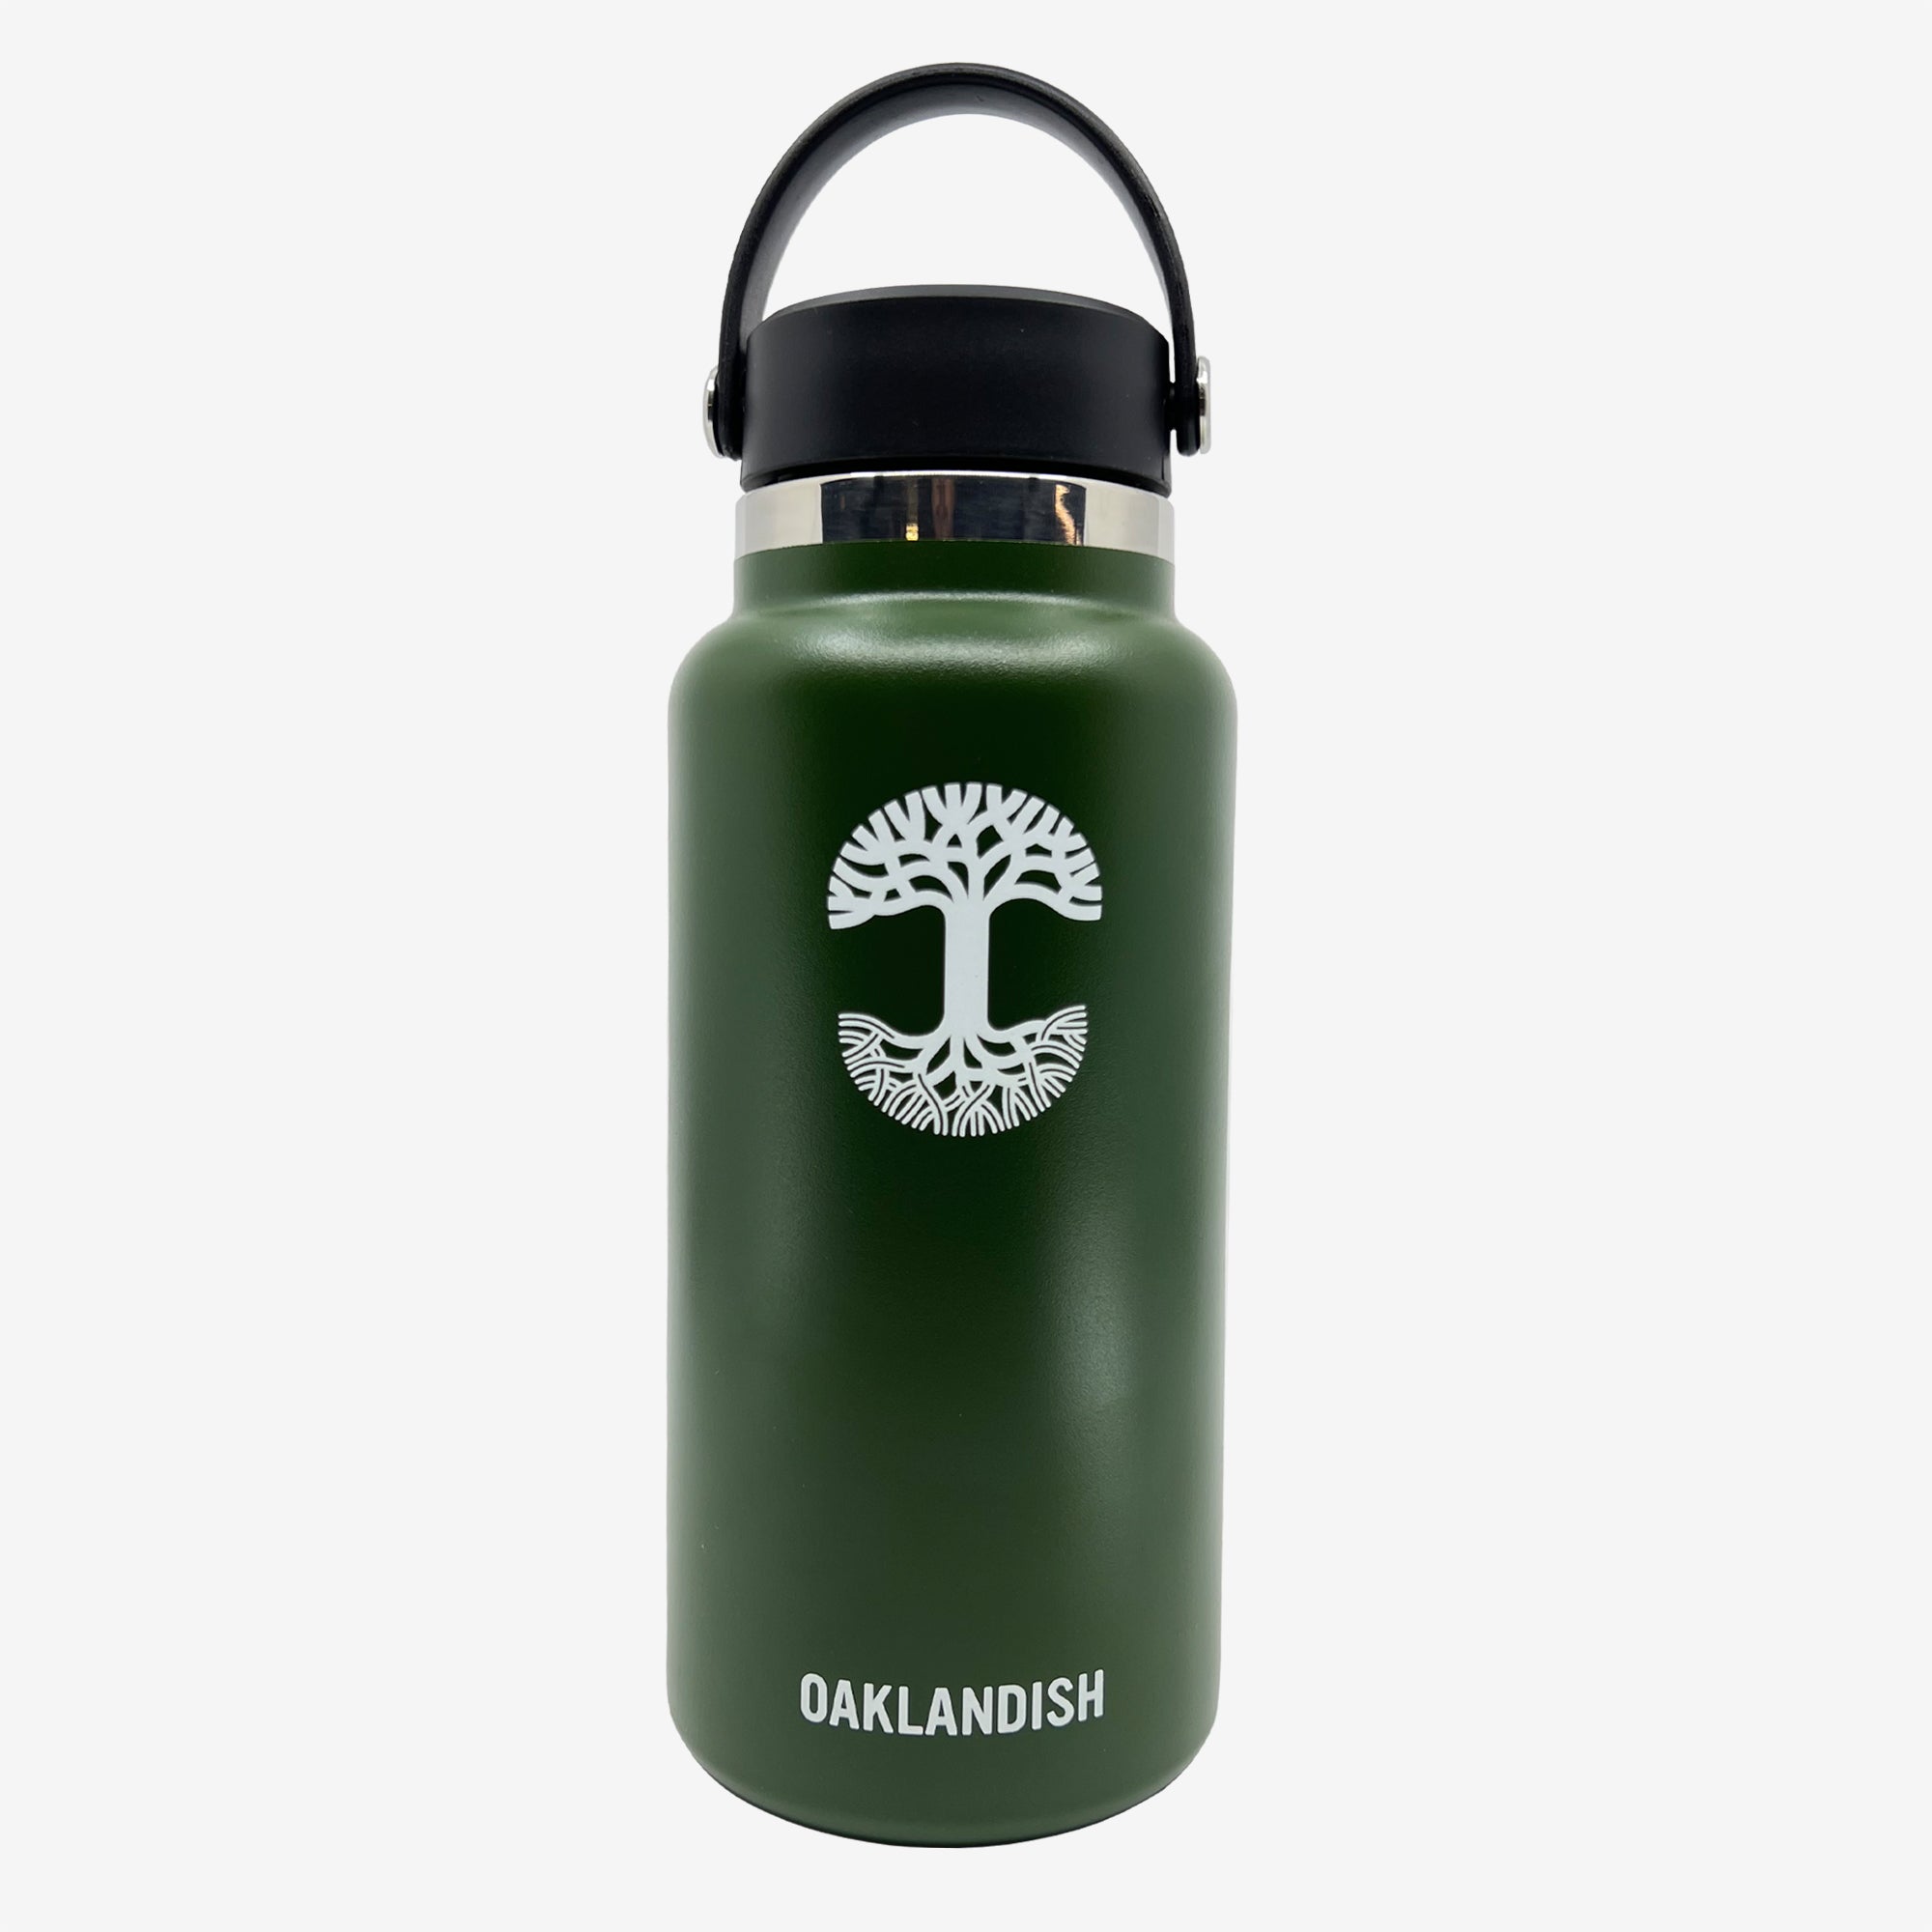 Green stainless steel 32 oz water canteen with white Oaklandish wordmark, logo, and black screw top lid.